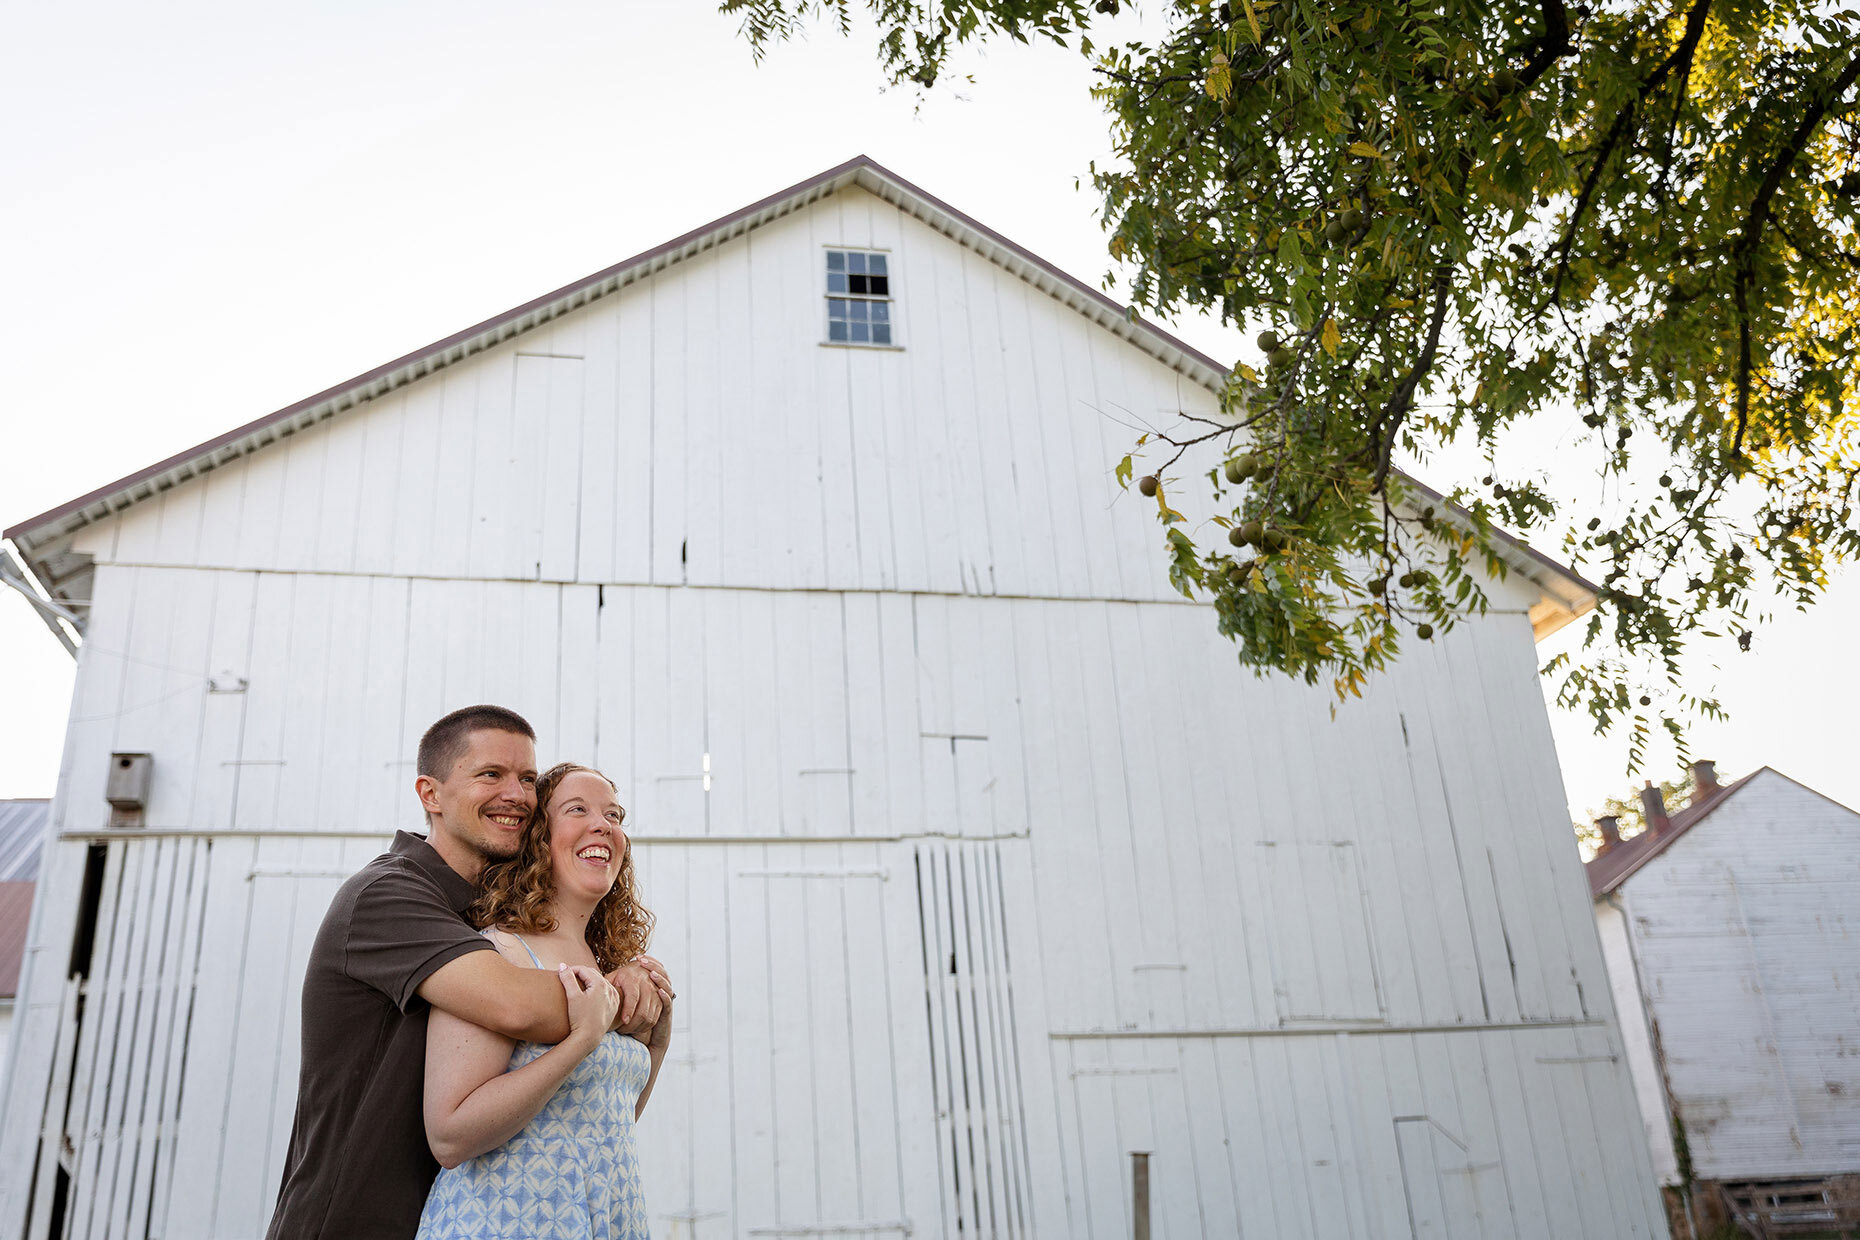 Engagement photos in front of a whit barn